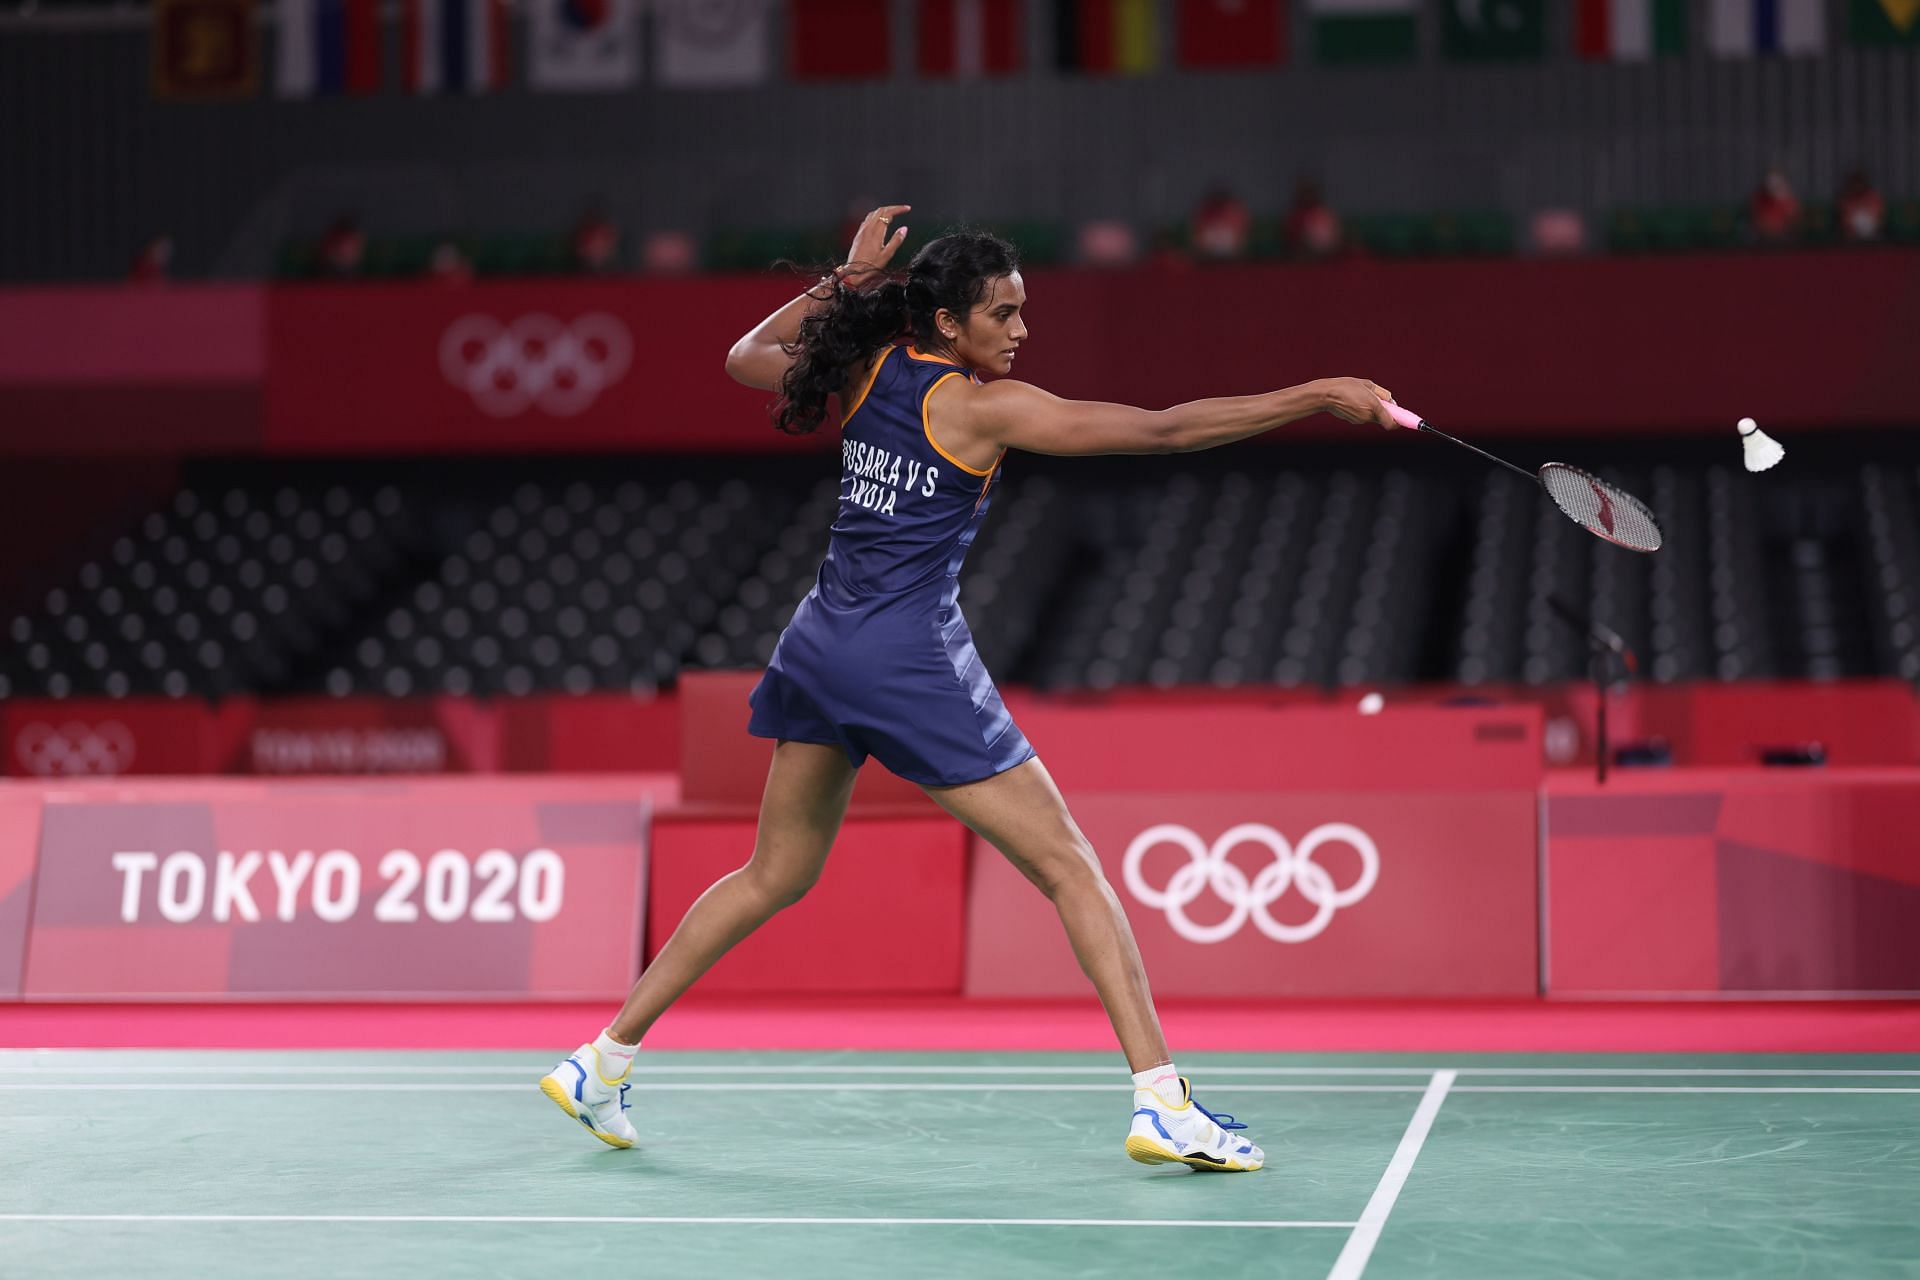 Sindhu in action at the Tokyo Olympics (Image courtesy: Getty Images)